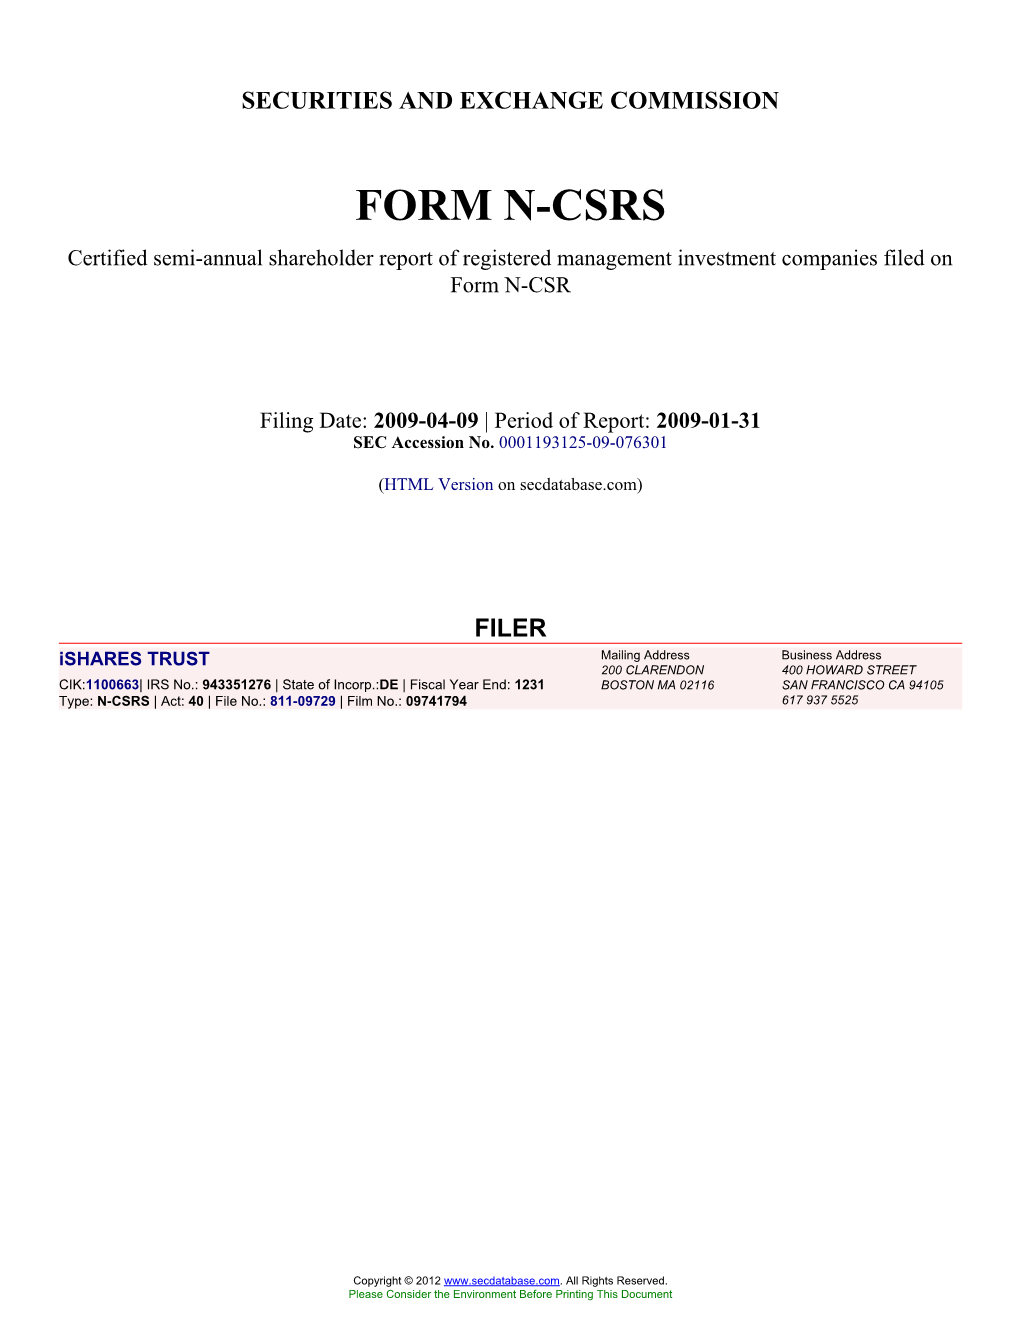 Ishares TRUST (Form: N-CSRS, Filing Date: 04/09/2009)